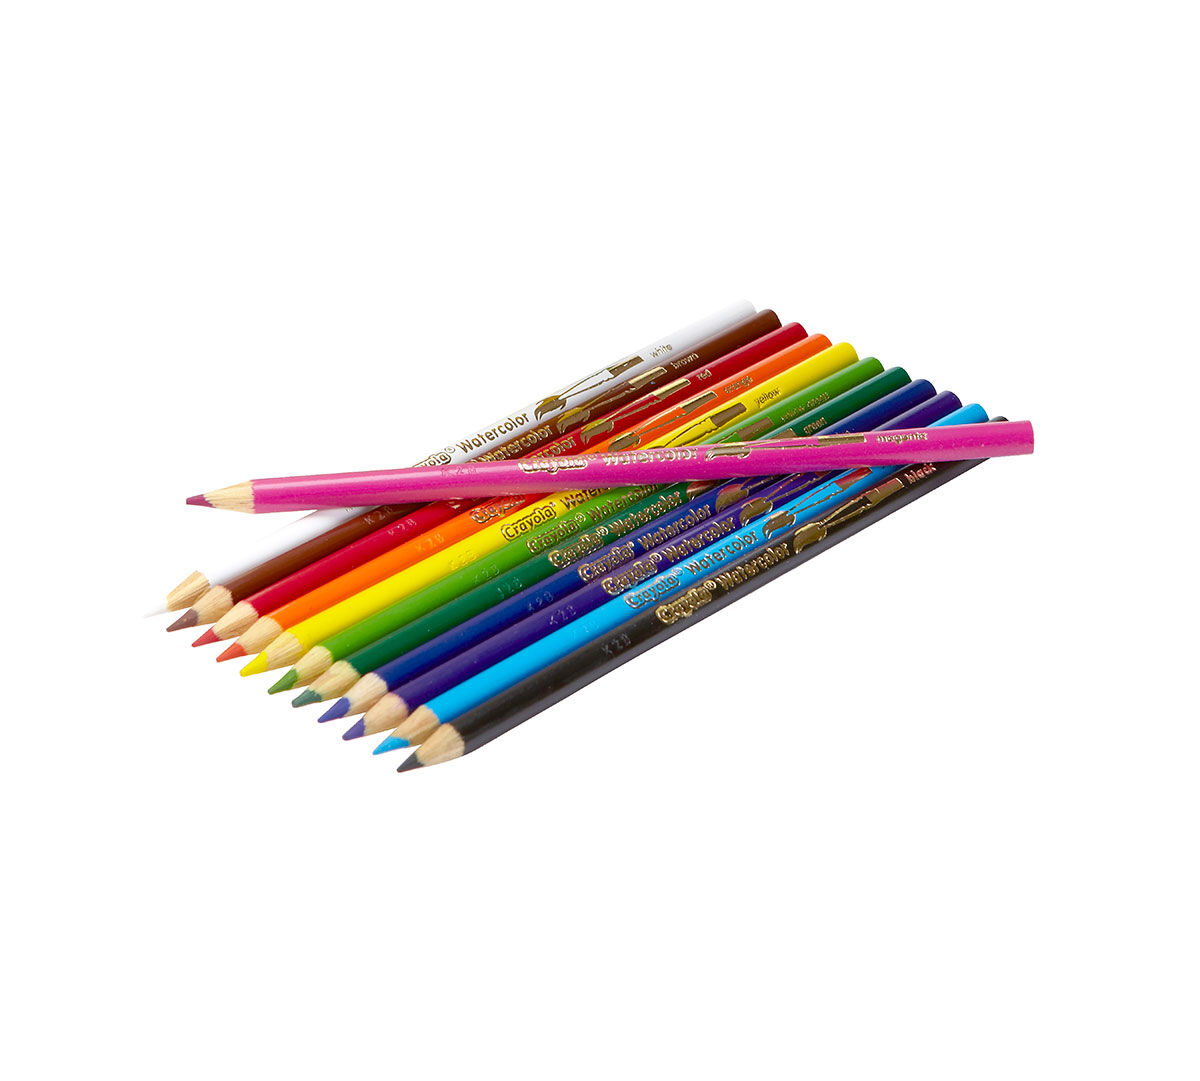 PROFESSIONAL Watercolor Pencils Pack of 12 Art Back to School Branded BRIGHT 